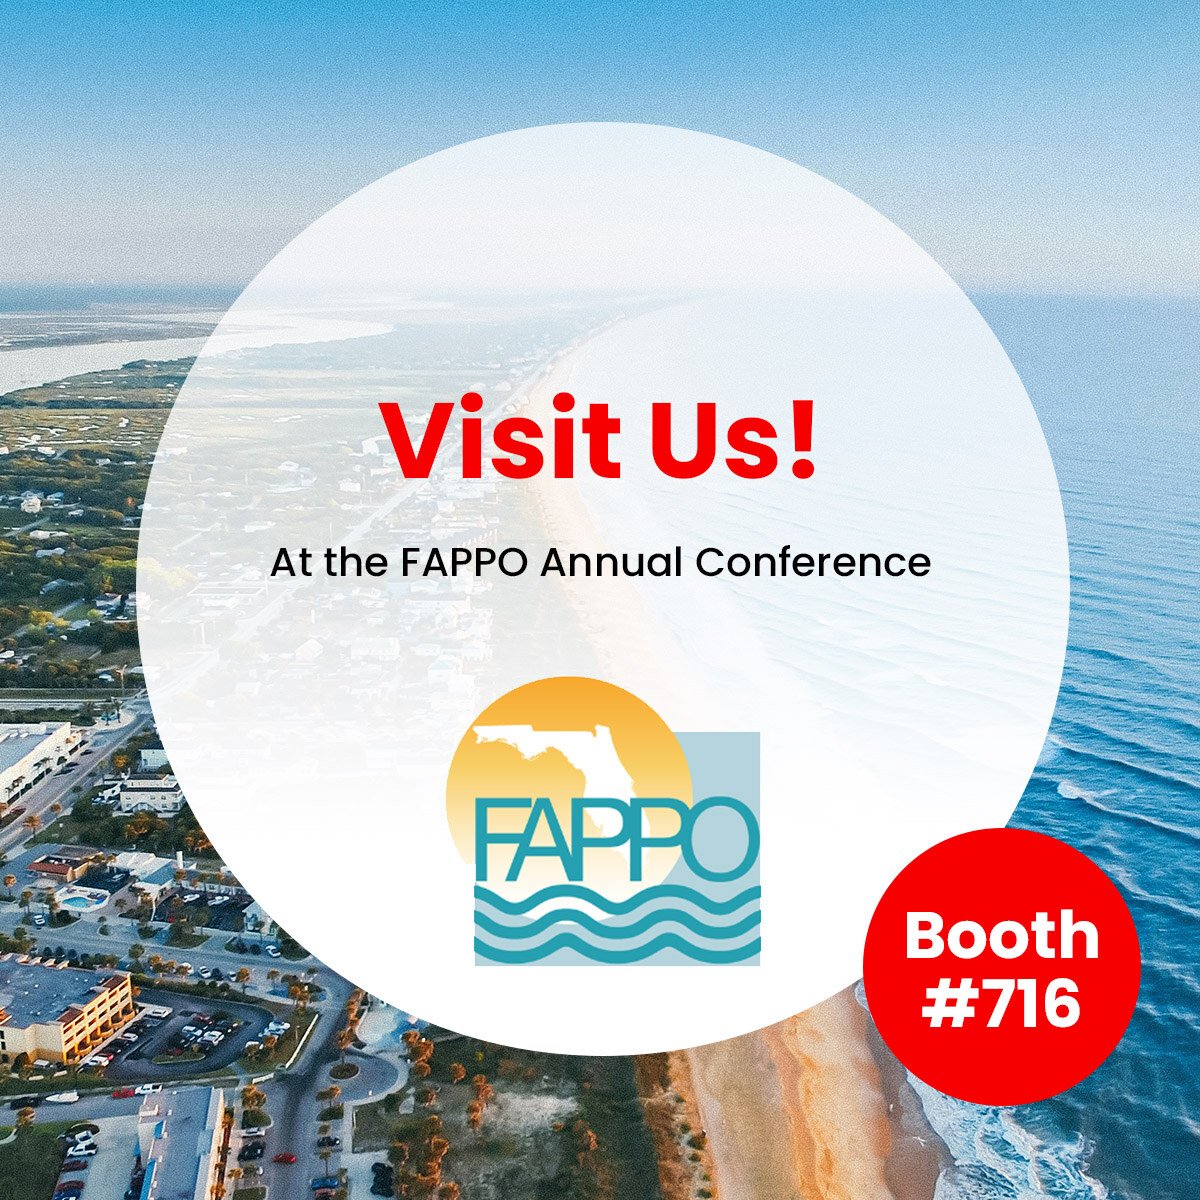 We're thrilled to be attending the FAPPO Annual Conference from May 19th - May 20th in Lake Buena Vista, FL! Stop by booth #716 & chat with our team to learn more about how you can modernize your entire procurement process! 
bit.ly/3UJ5xfY
#FAPPO #procurementhero